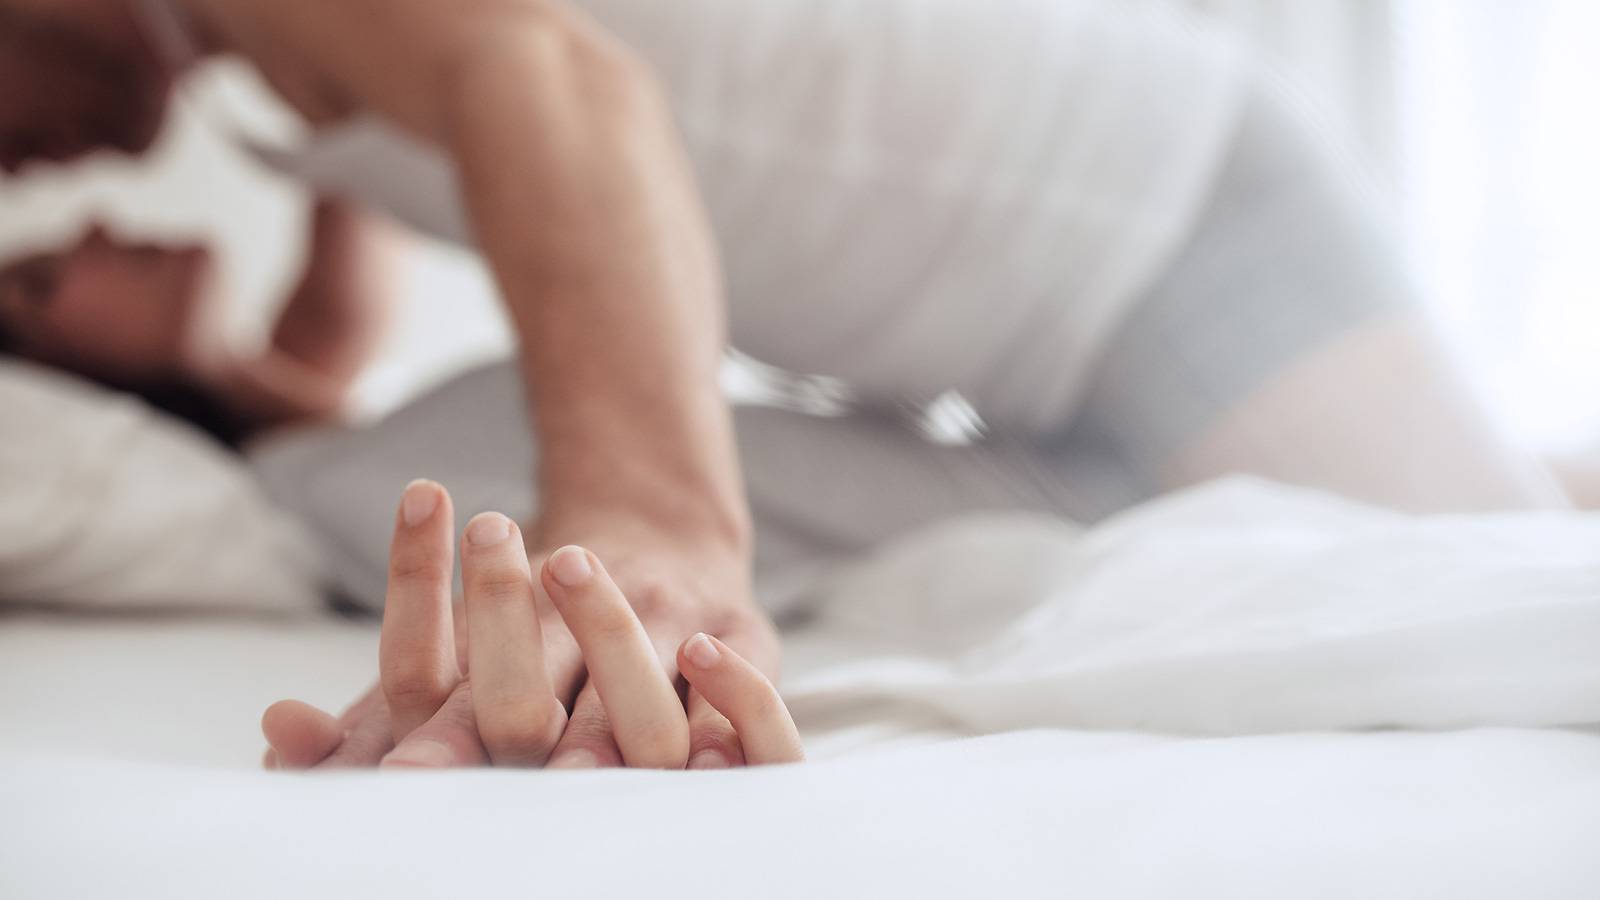 9 mind-blowing things to know about sex after marriage